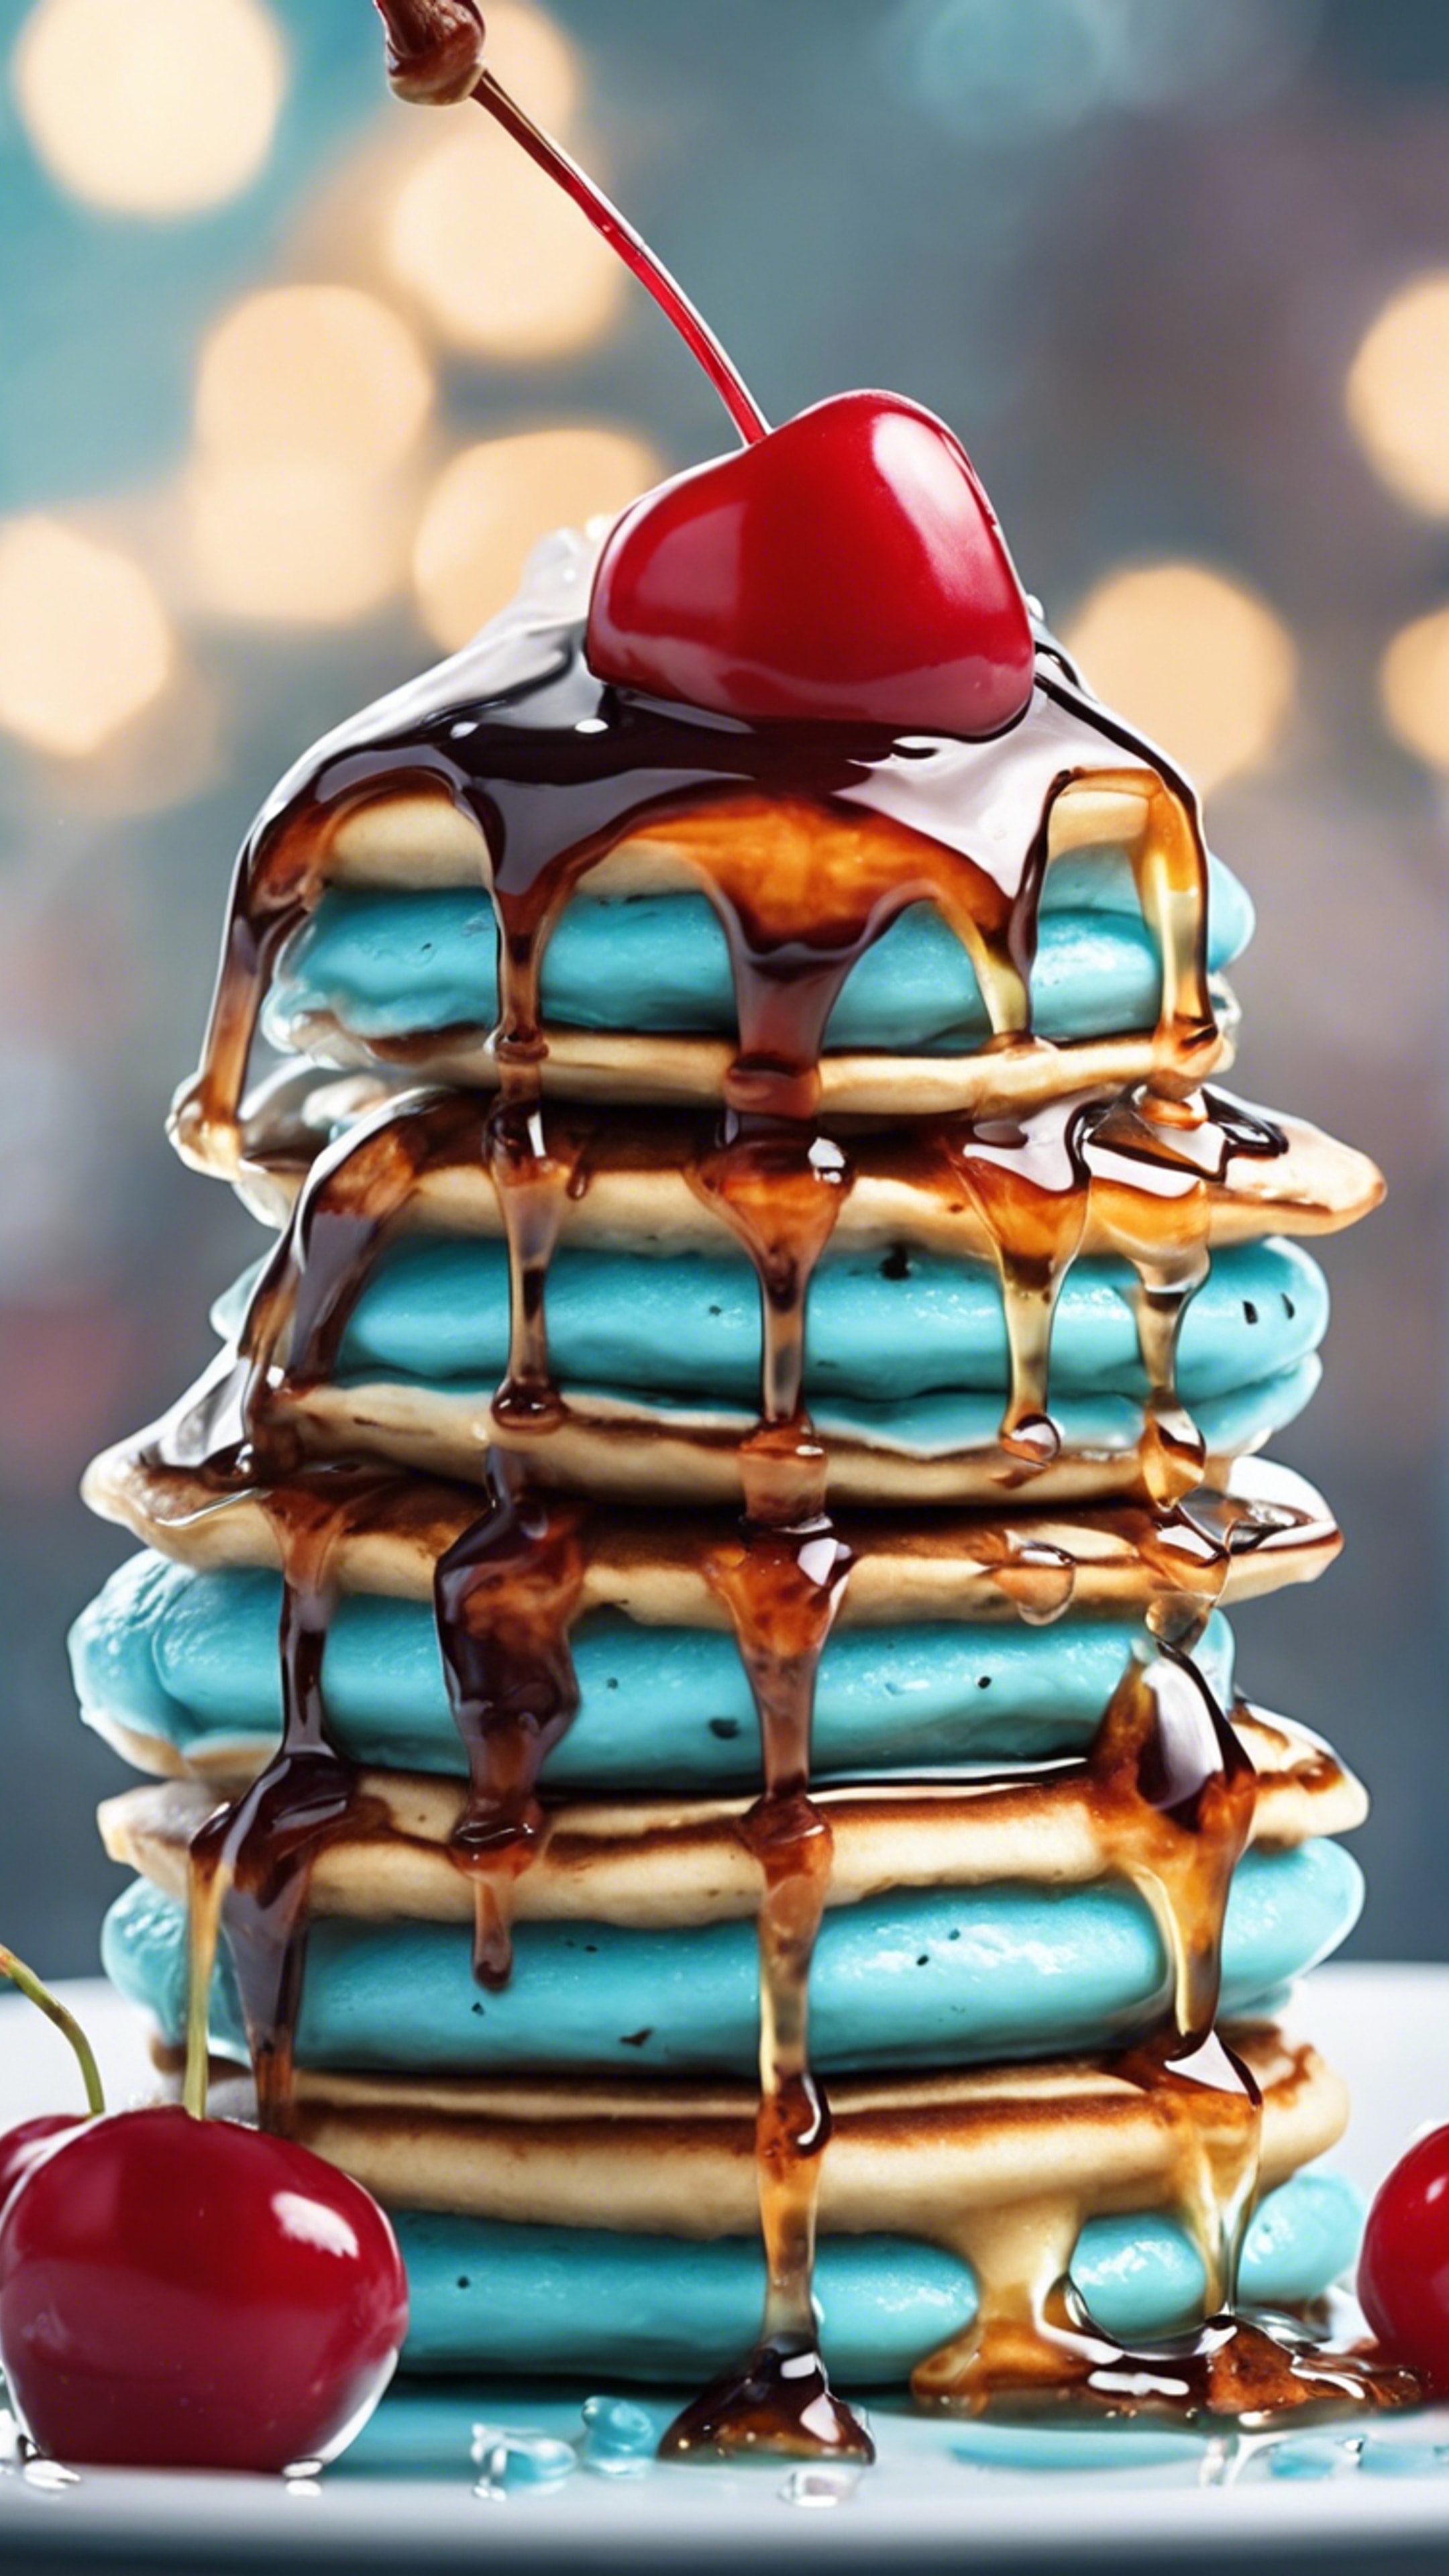 A stack of kawaii light blue pancakes dripping with syrup and a cherry on top. Hintergrund[05c3a9af3a95463c8379]